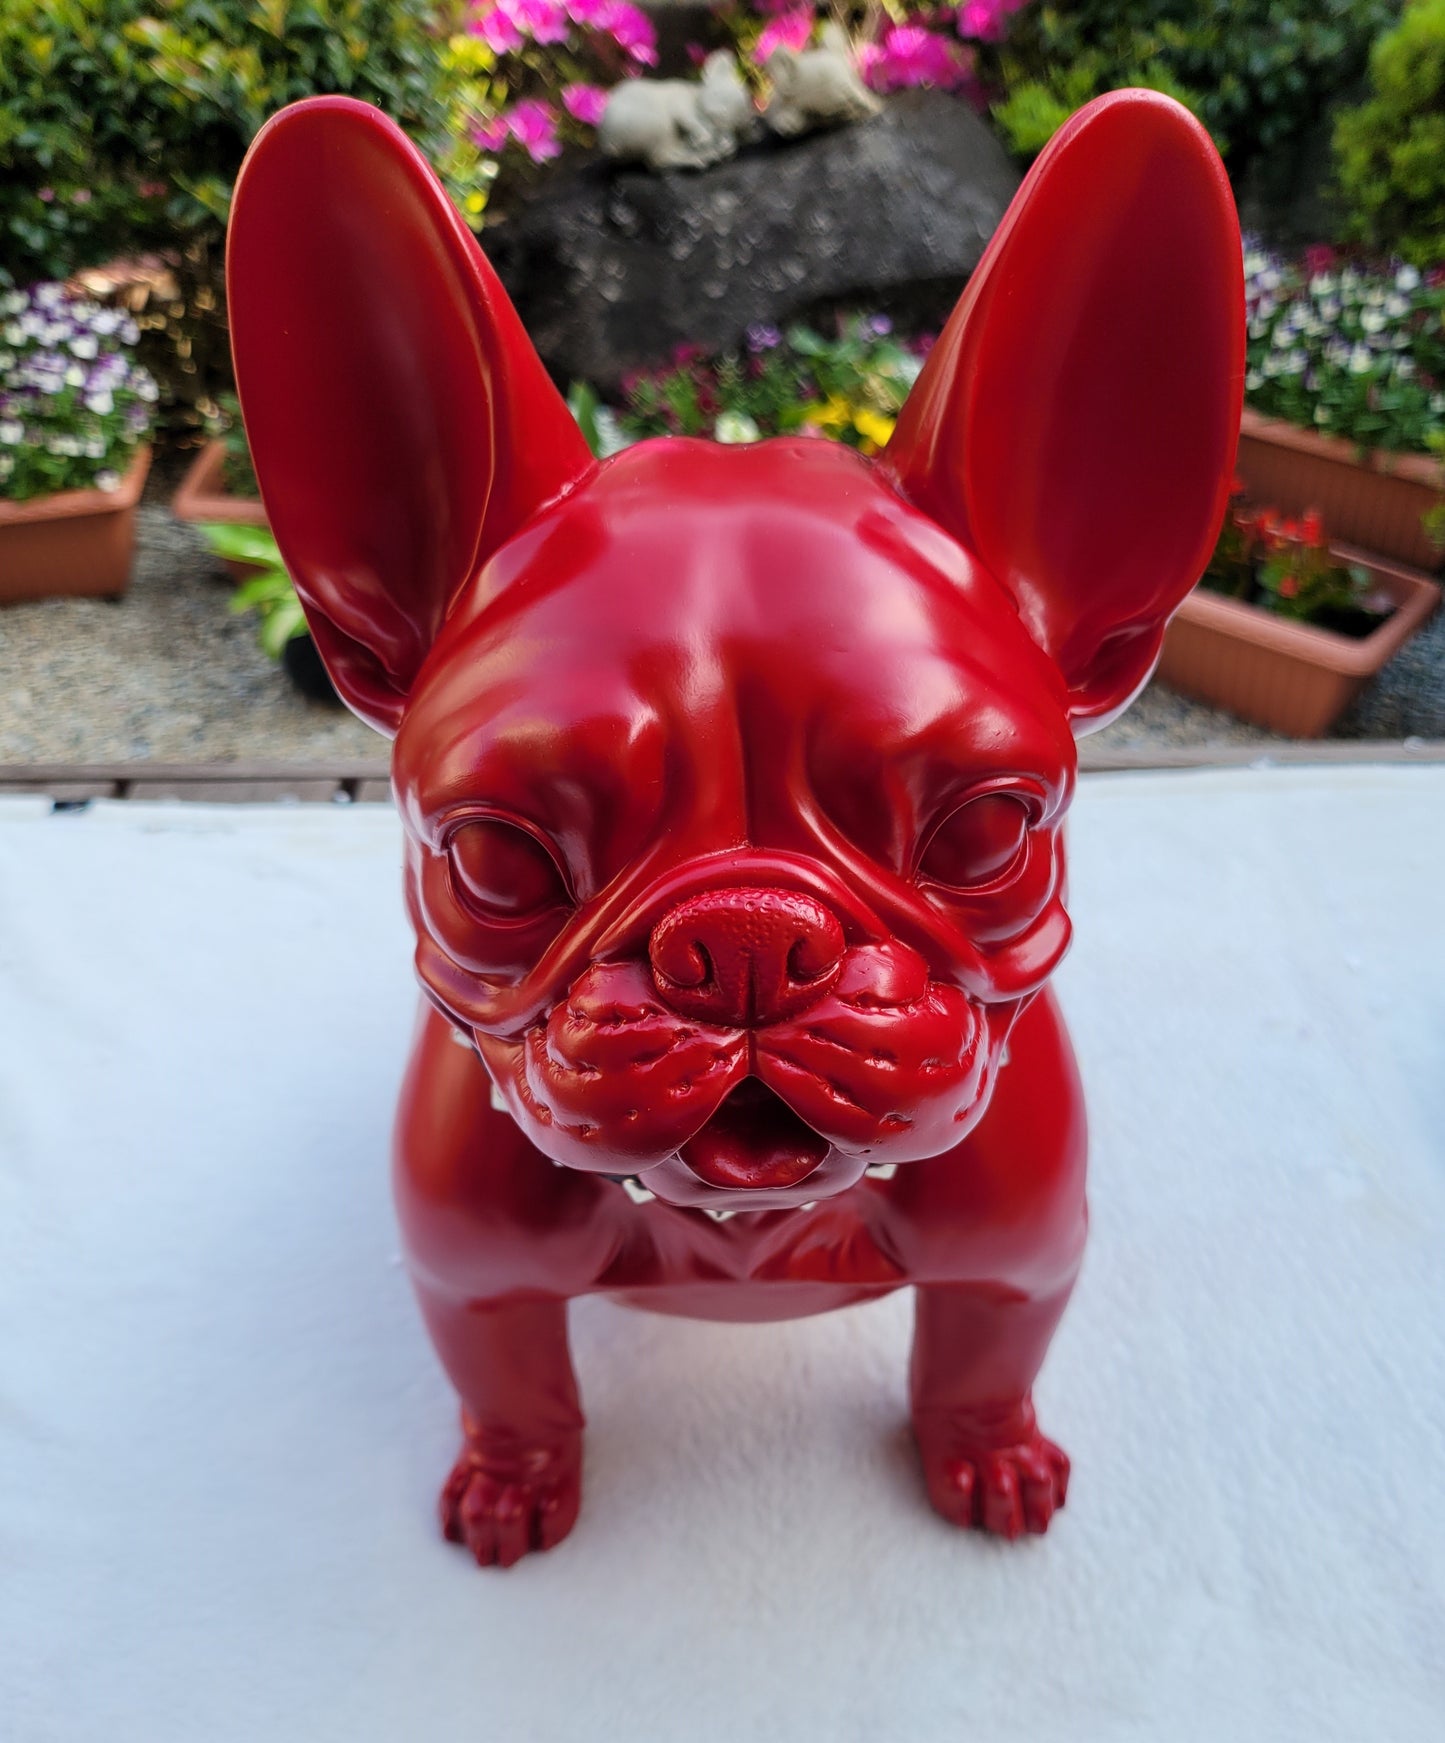 Colorful French Bulldog Free shipping only now!